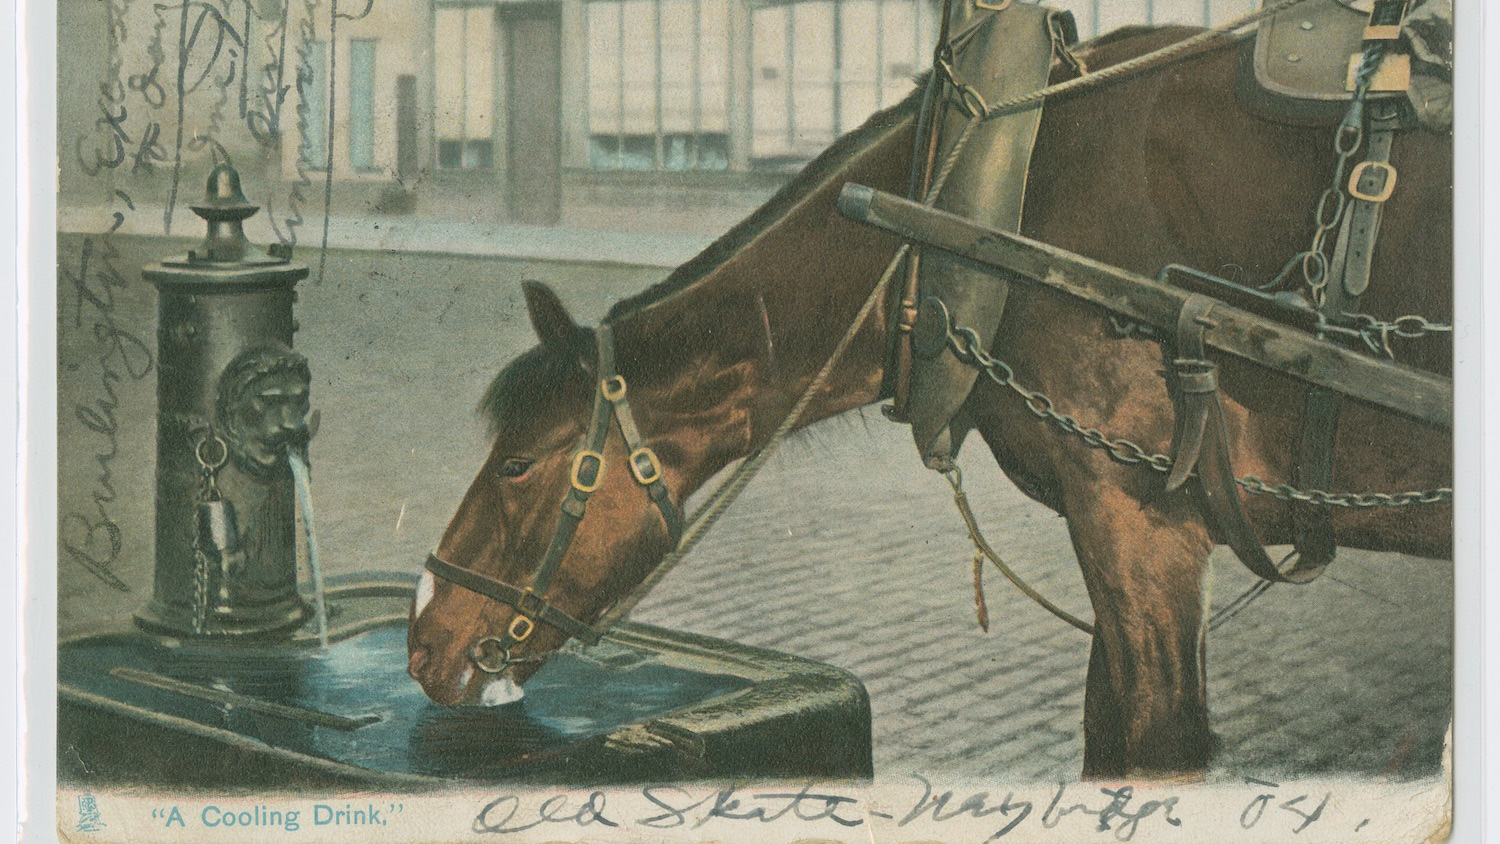 "A Cooling Drink" postcard